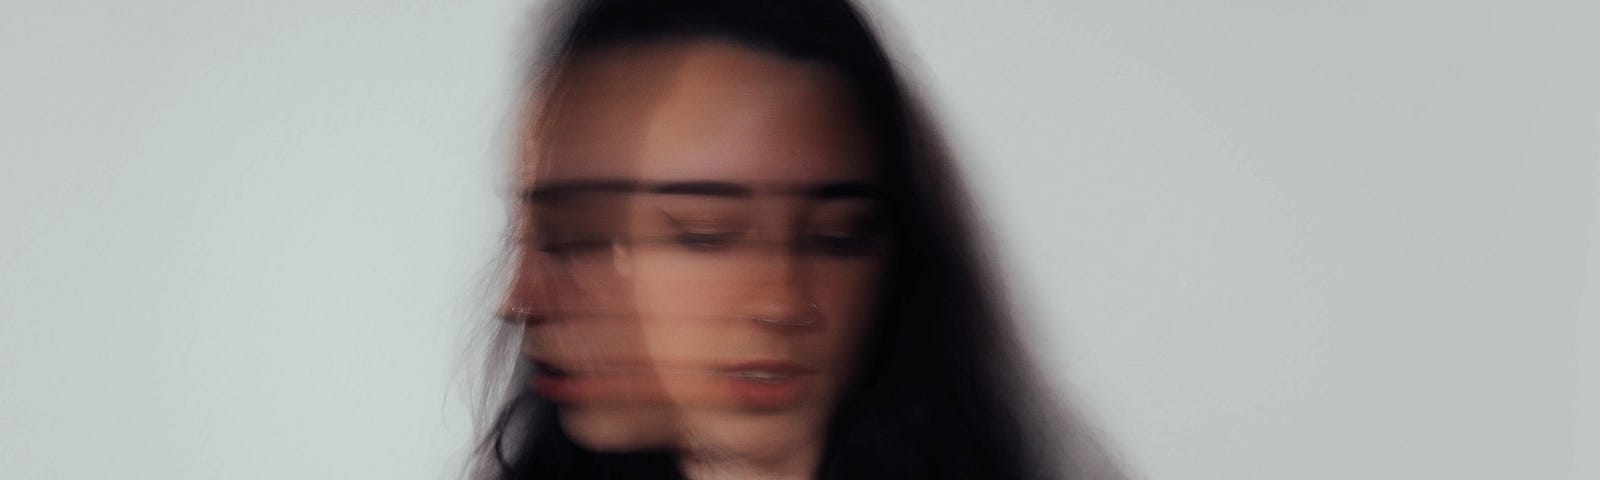 A woman experiencing social anxiety — blurring her face to depict the confusion she feels on the inside.